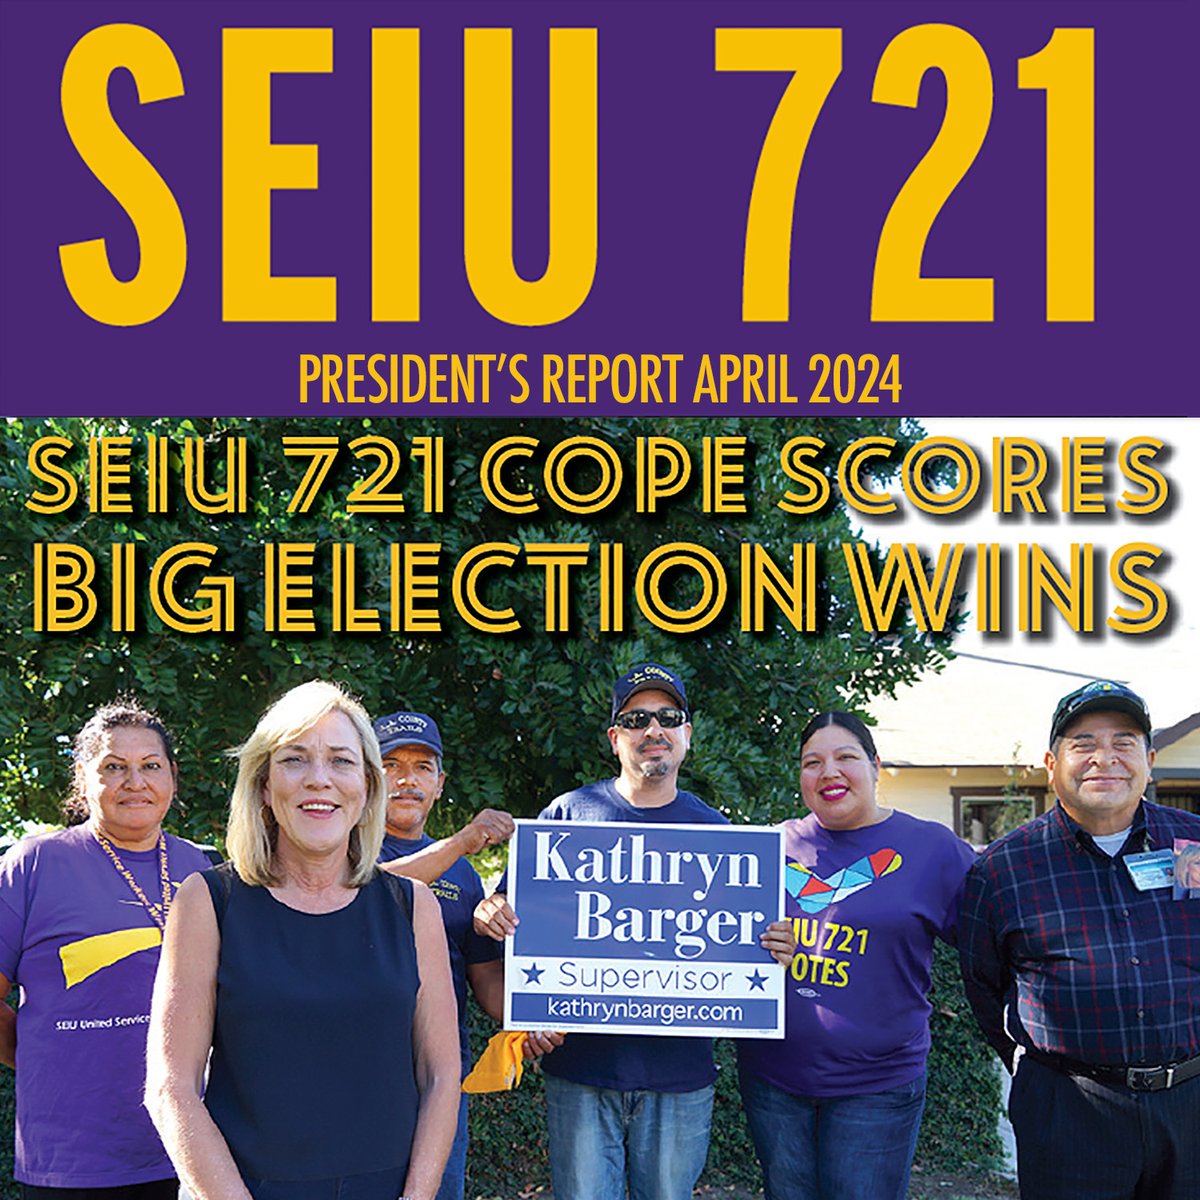 In this month's President's Report, we celebrate Women's History Month, uplift monumental representational victories, and Occidental Student workers continue fighting to join SEIU 721. Read more: seiu721.org/presidents-rep…